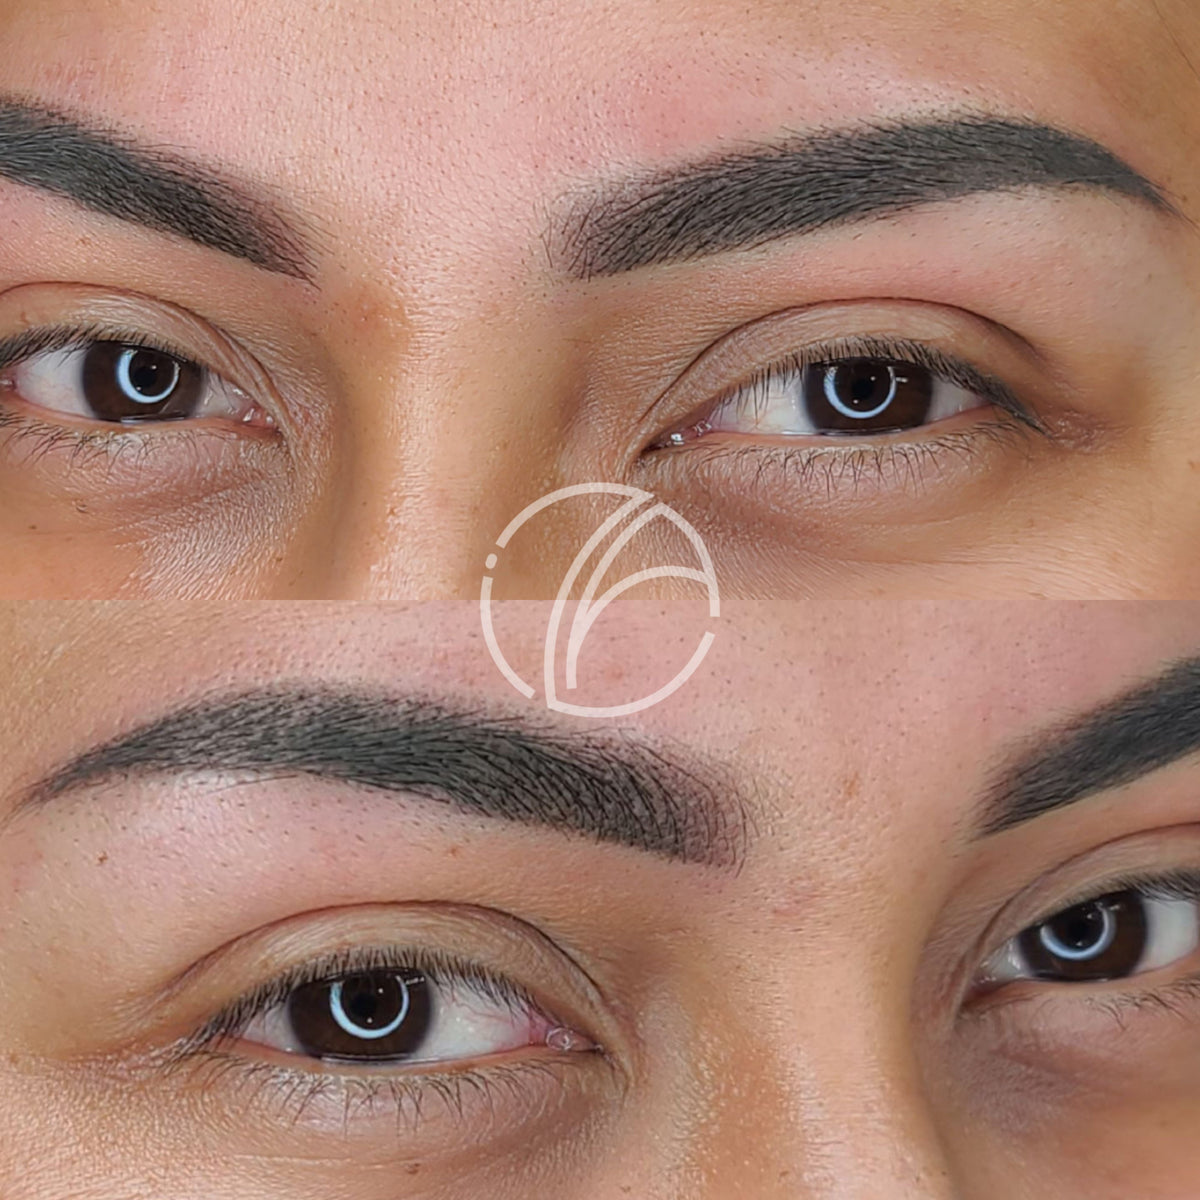 3-IN-1 Eyebrow Course Online Training | Online Training | Tuition + Kit $1,758.00